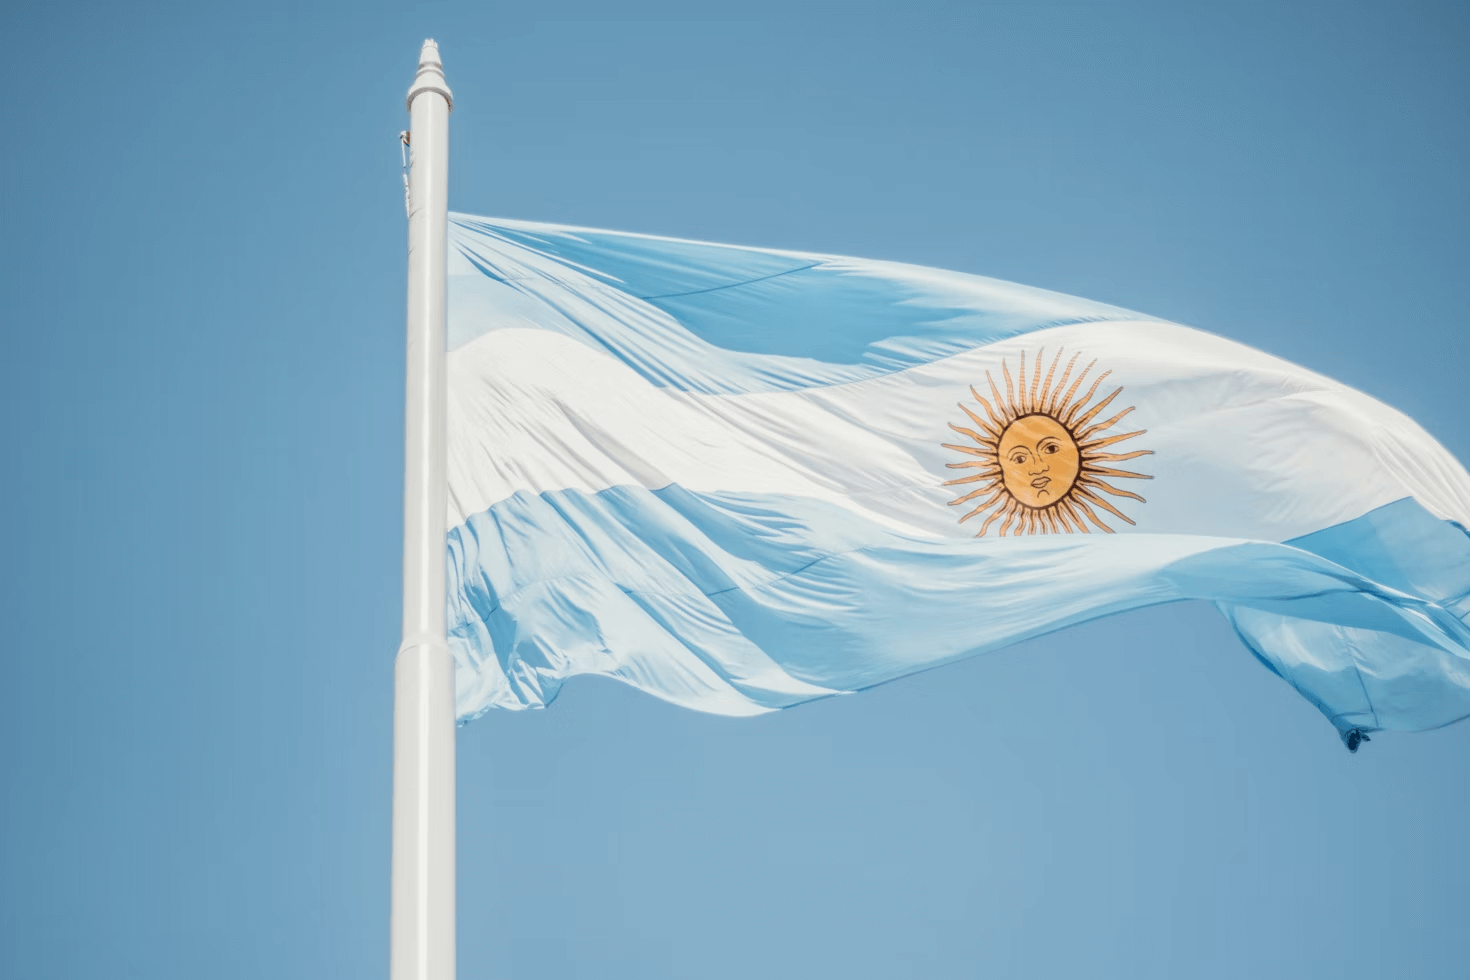 Argentina's financial regulator introduces mandatory registration for all cryptocurrency service providers